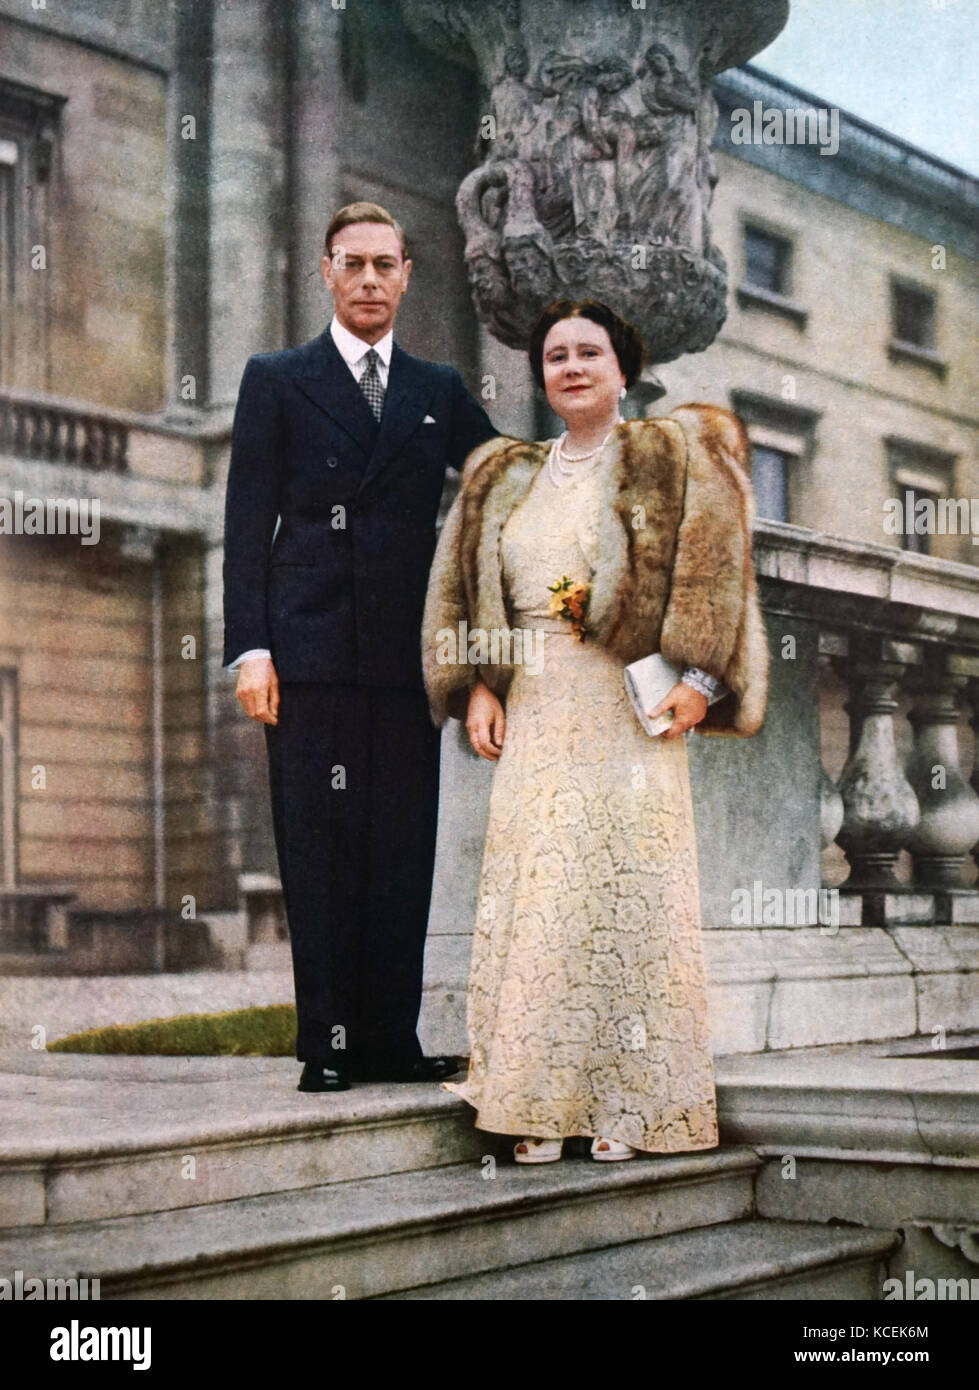 Photograph of King George VI (1895-1952) and Queen Elizabeth Queen Mother (1900-2002) celebrating their Silver Wedding Anniversary. Dated 20th Century Stock Photo